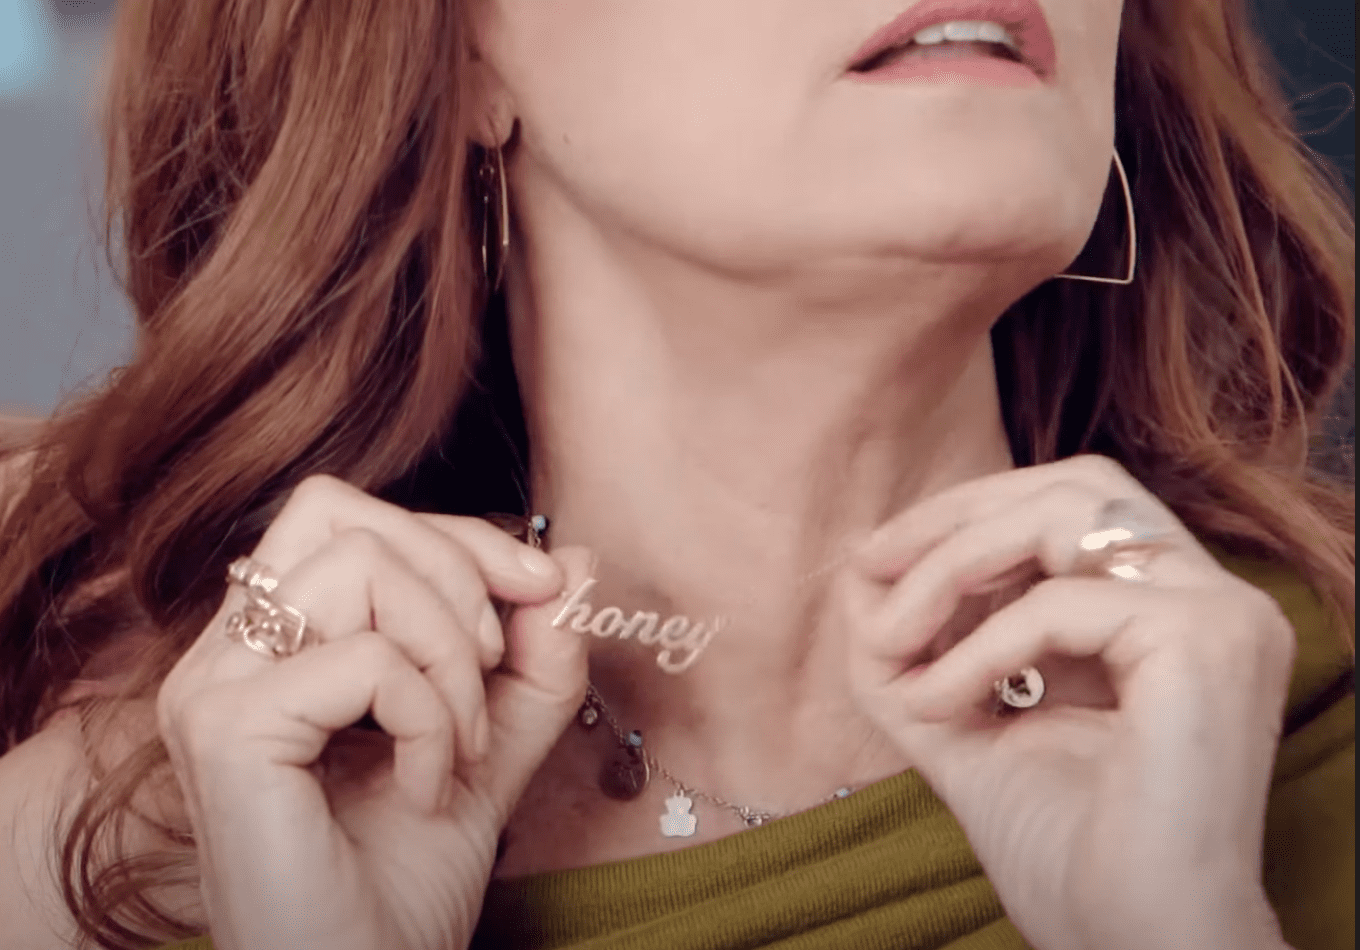 Susan Sarandon's necklace given to her by her daughter with the name her grandchildren call her | Source: Youtube.com/goodhousekeeping